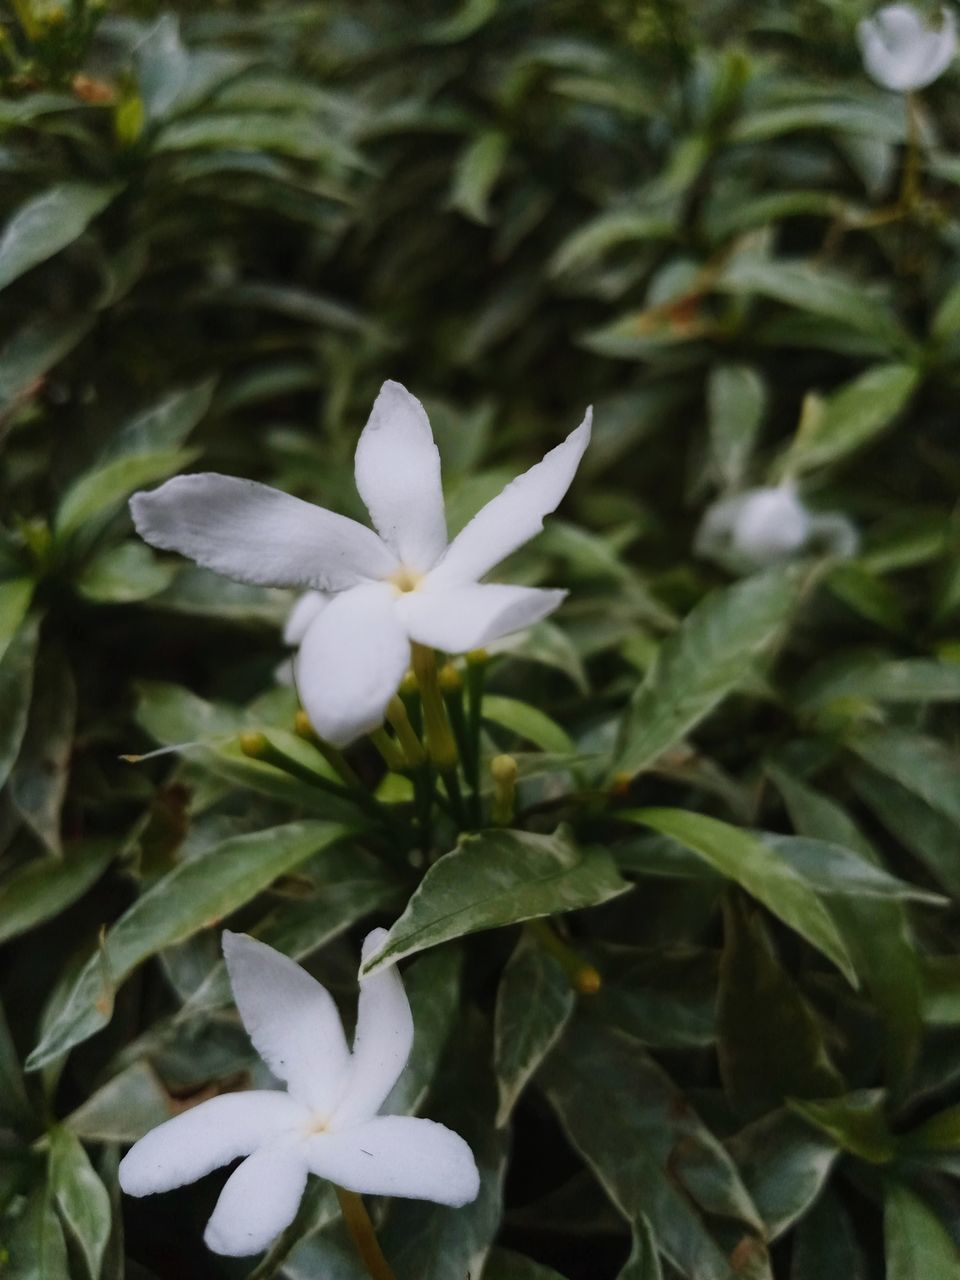 flower, plant, flowering plant, beauty in nature, leaf, plant part, freshness, petal, growth, close-up, white, nature, flower head, fragility, inflorescence, no people, outdoors, blossom, springtime, green, frangipani, botany, focus on foreground, day